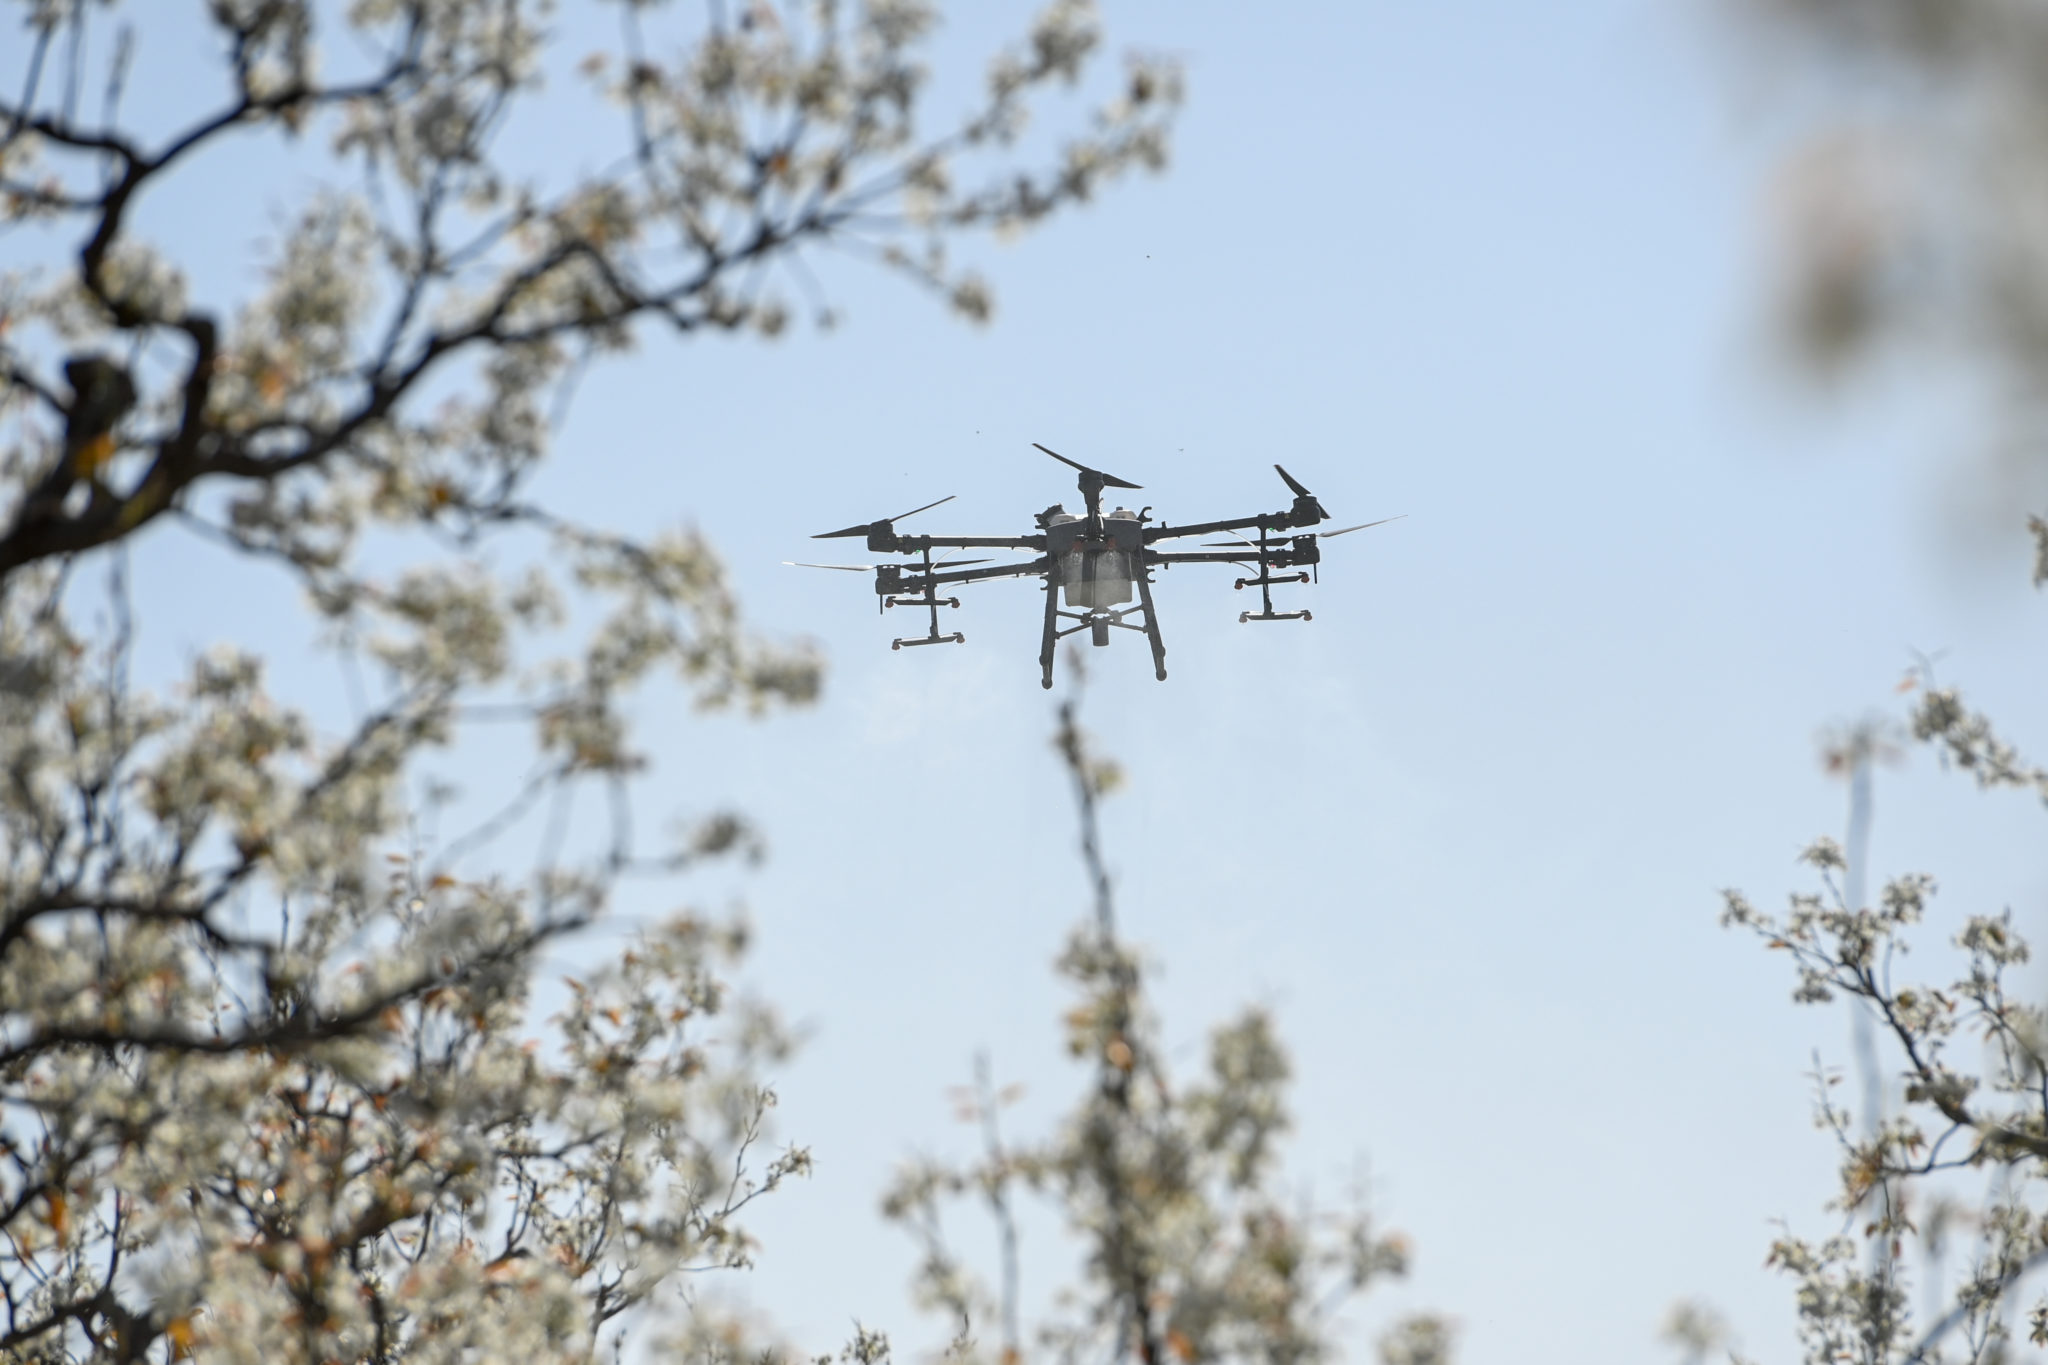 A drone pollinates pear trees at a pear orchard in China.